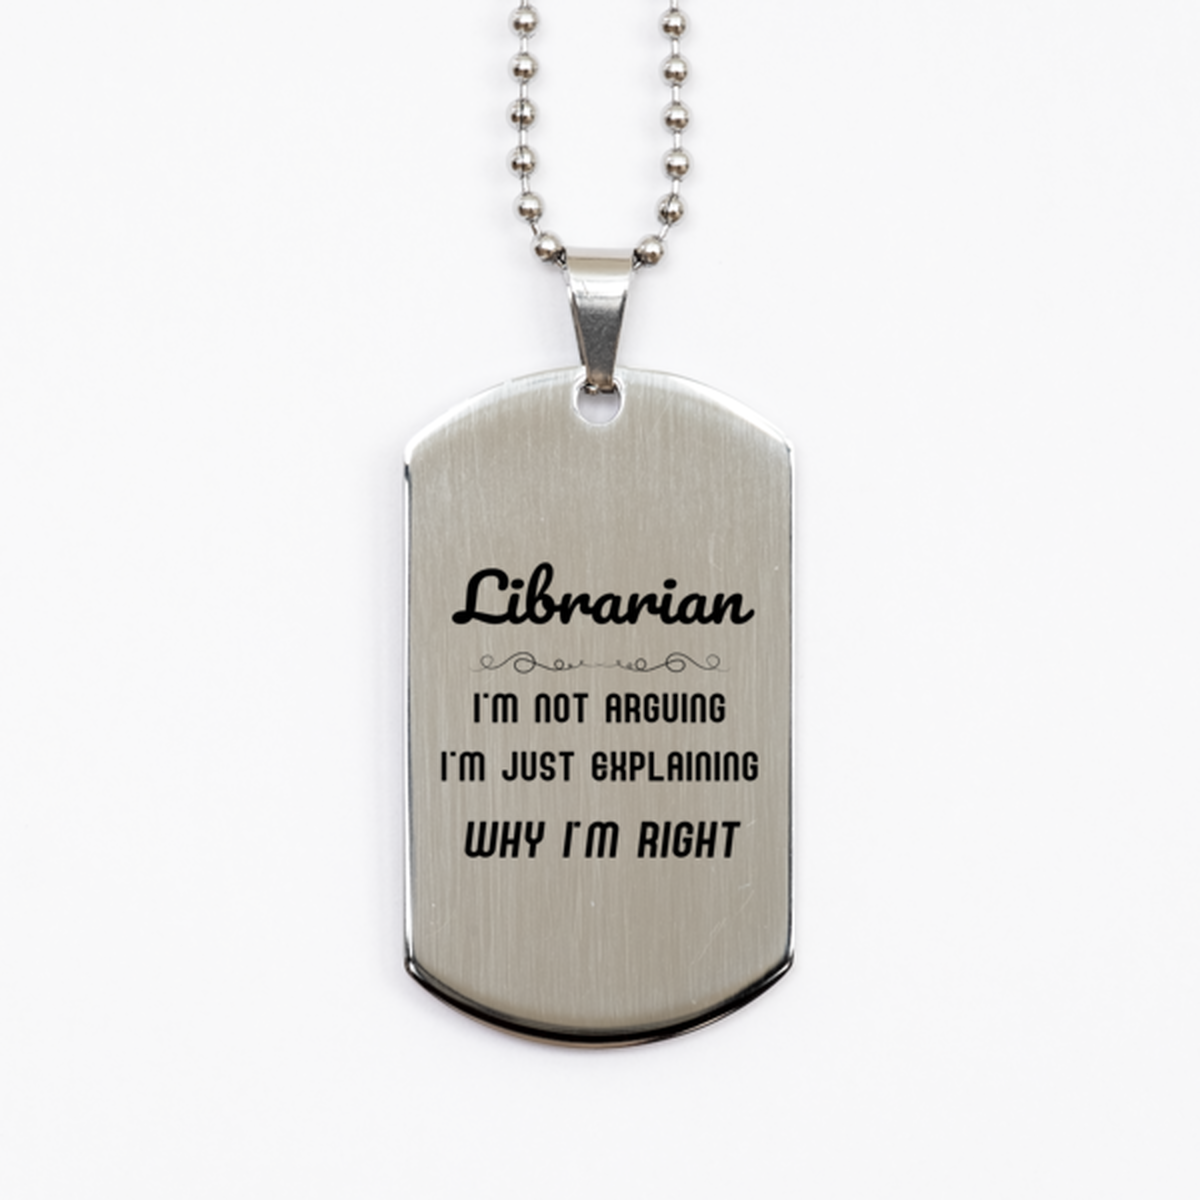 Librarian I'm not Arguing. I'm Just Explaining Why I'm RIGHT Silver Dog Tag, Funny Saying Quote Librarian Gifts For Librarian Graduation Birthday Christmas Gifts for Men Women Coworker